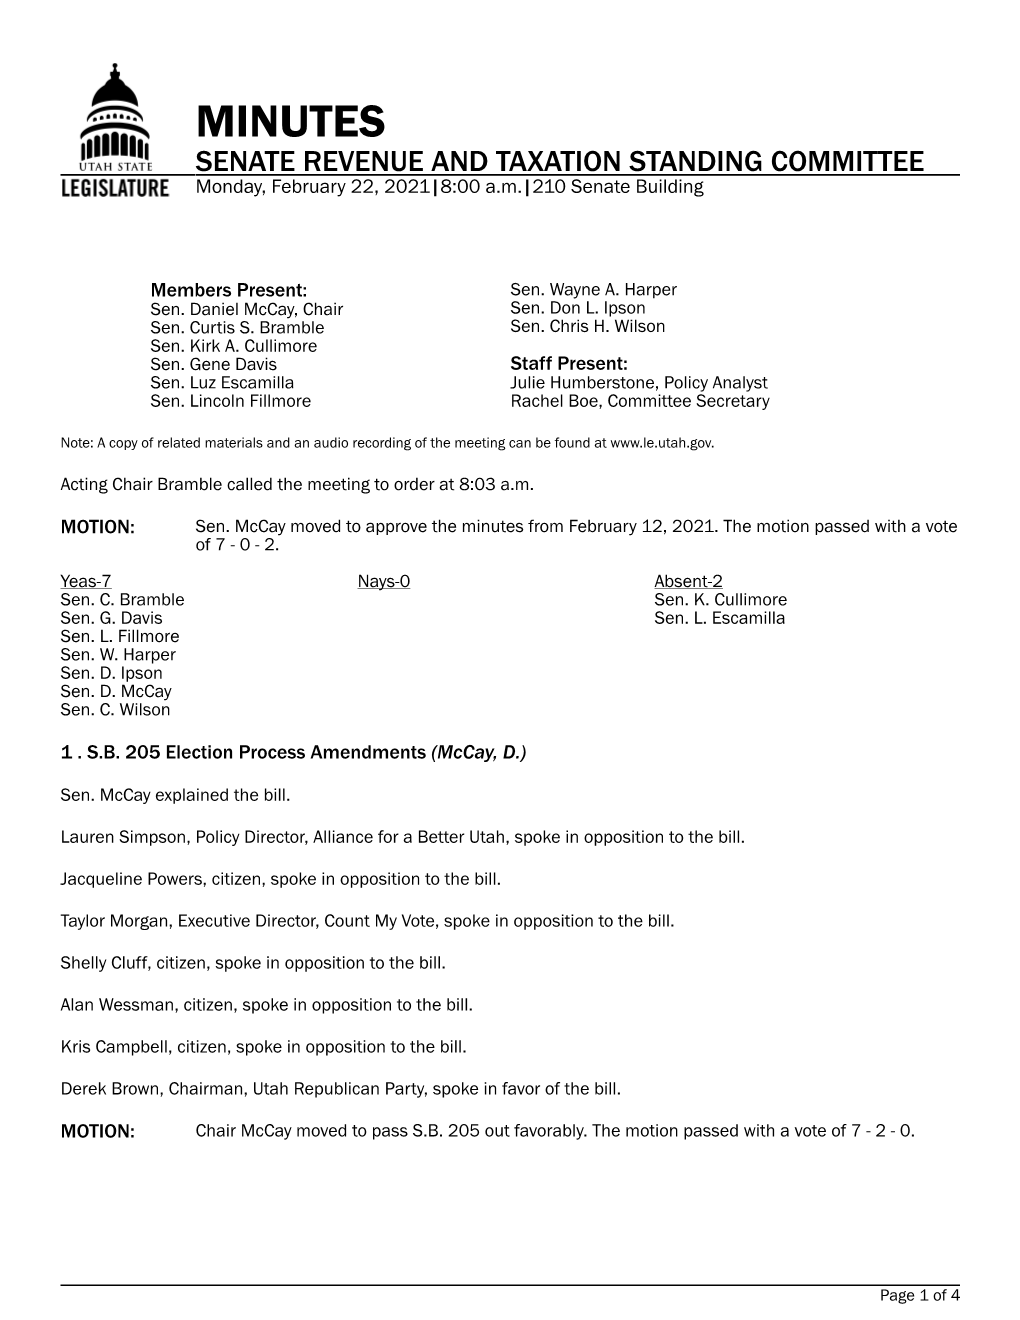 MINUTES SENATE REVENUE and TAXATION STANDING COMMITTEE Monday, February 22, 2021|8:00 A.M.|210 Senate Building